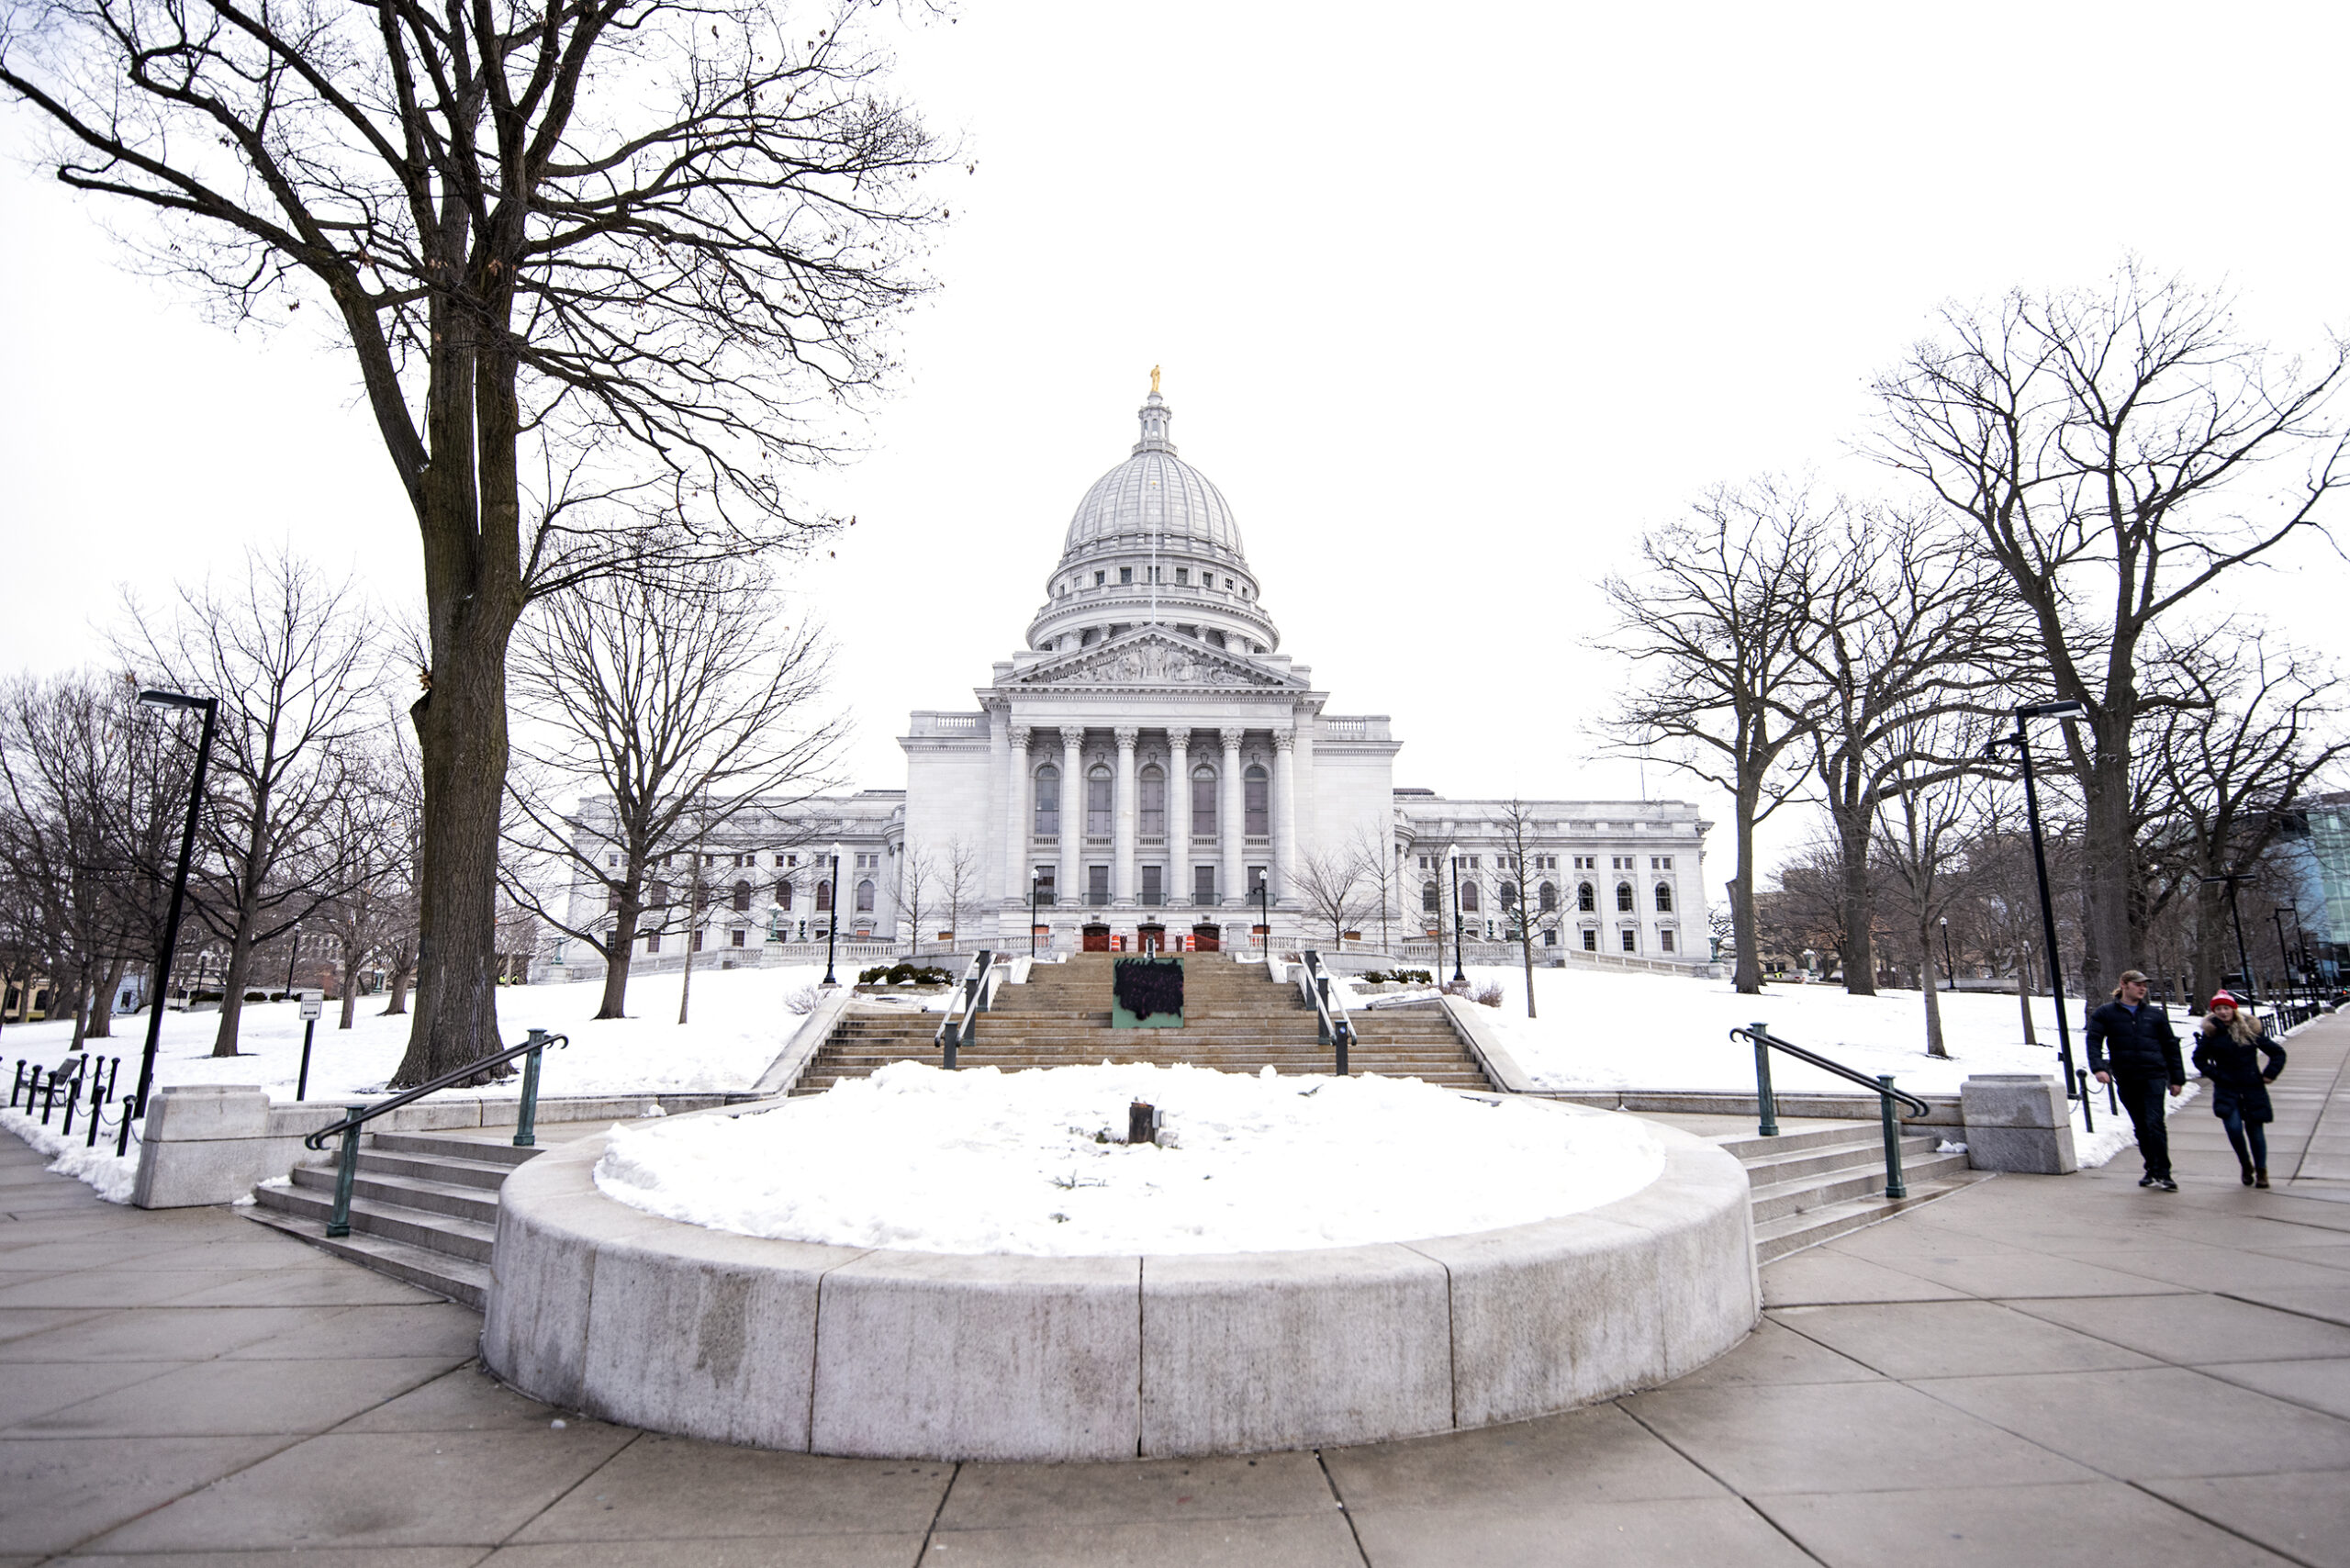 A snowy scene at the Wisconsin State Capitol